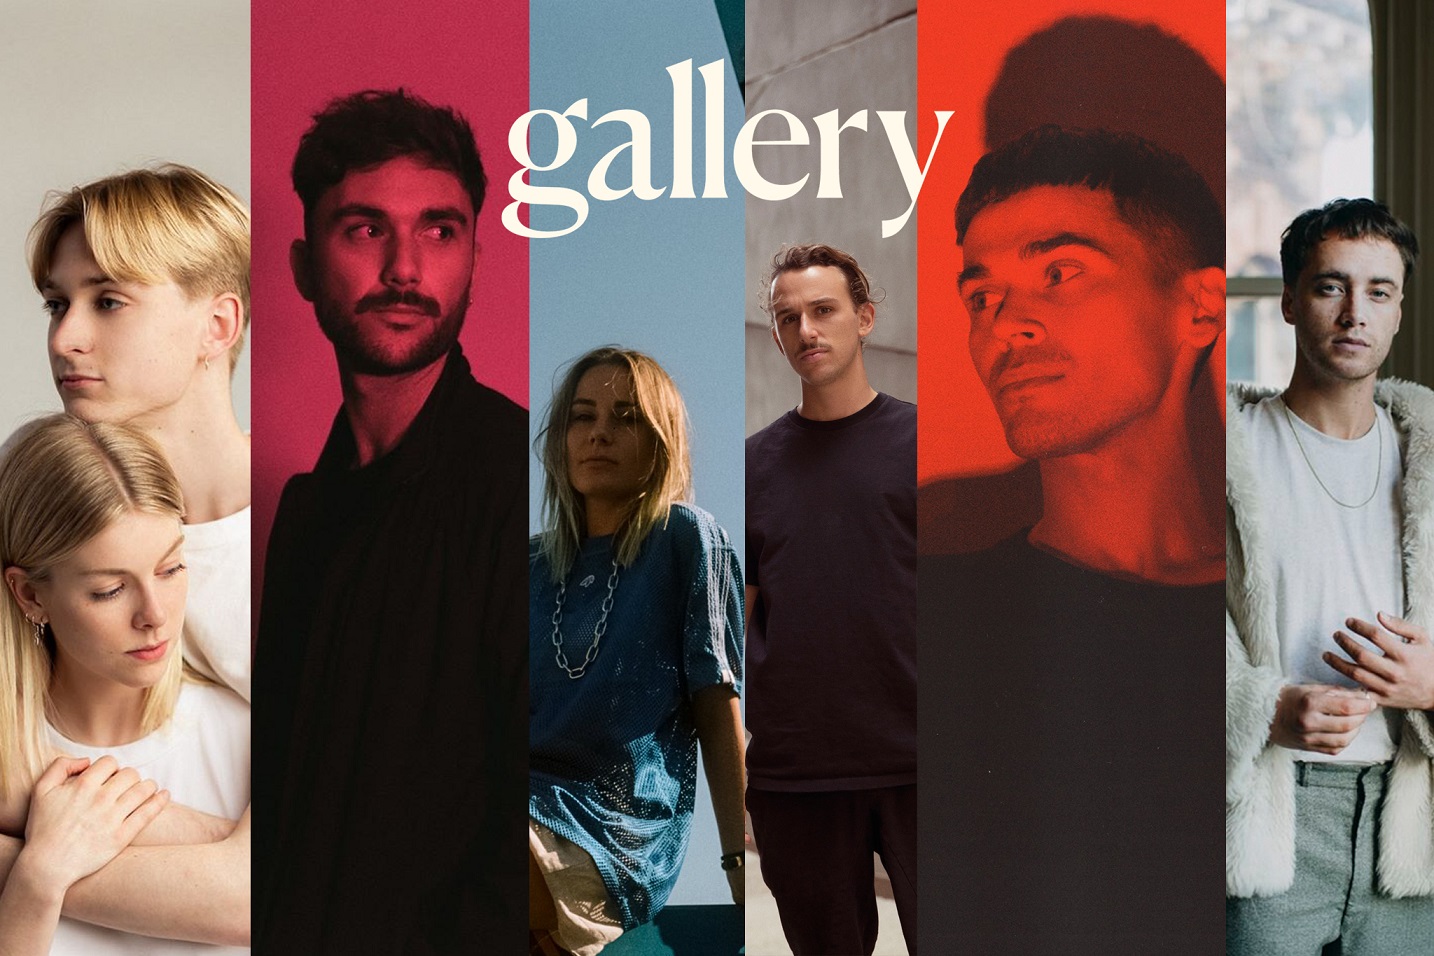 Hot Seat: Angus Russell on his new label & mgmt company Gallery [exclusive]